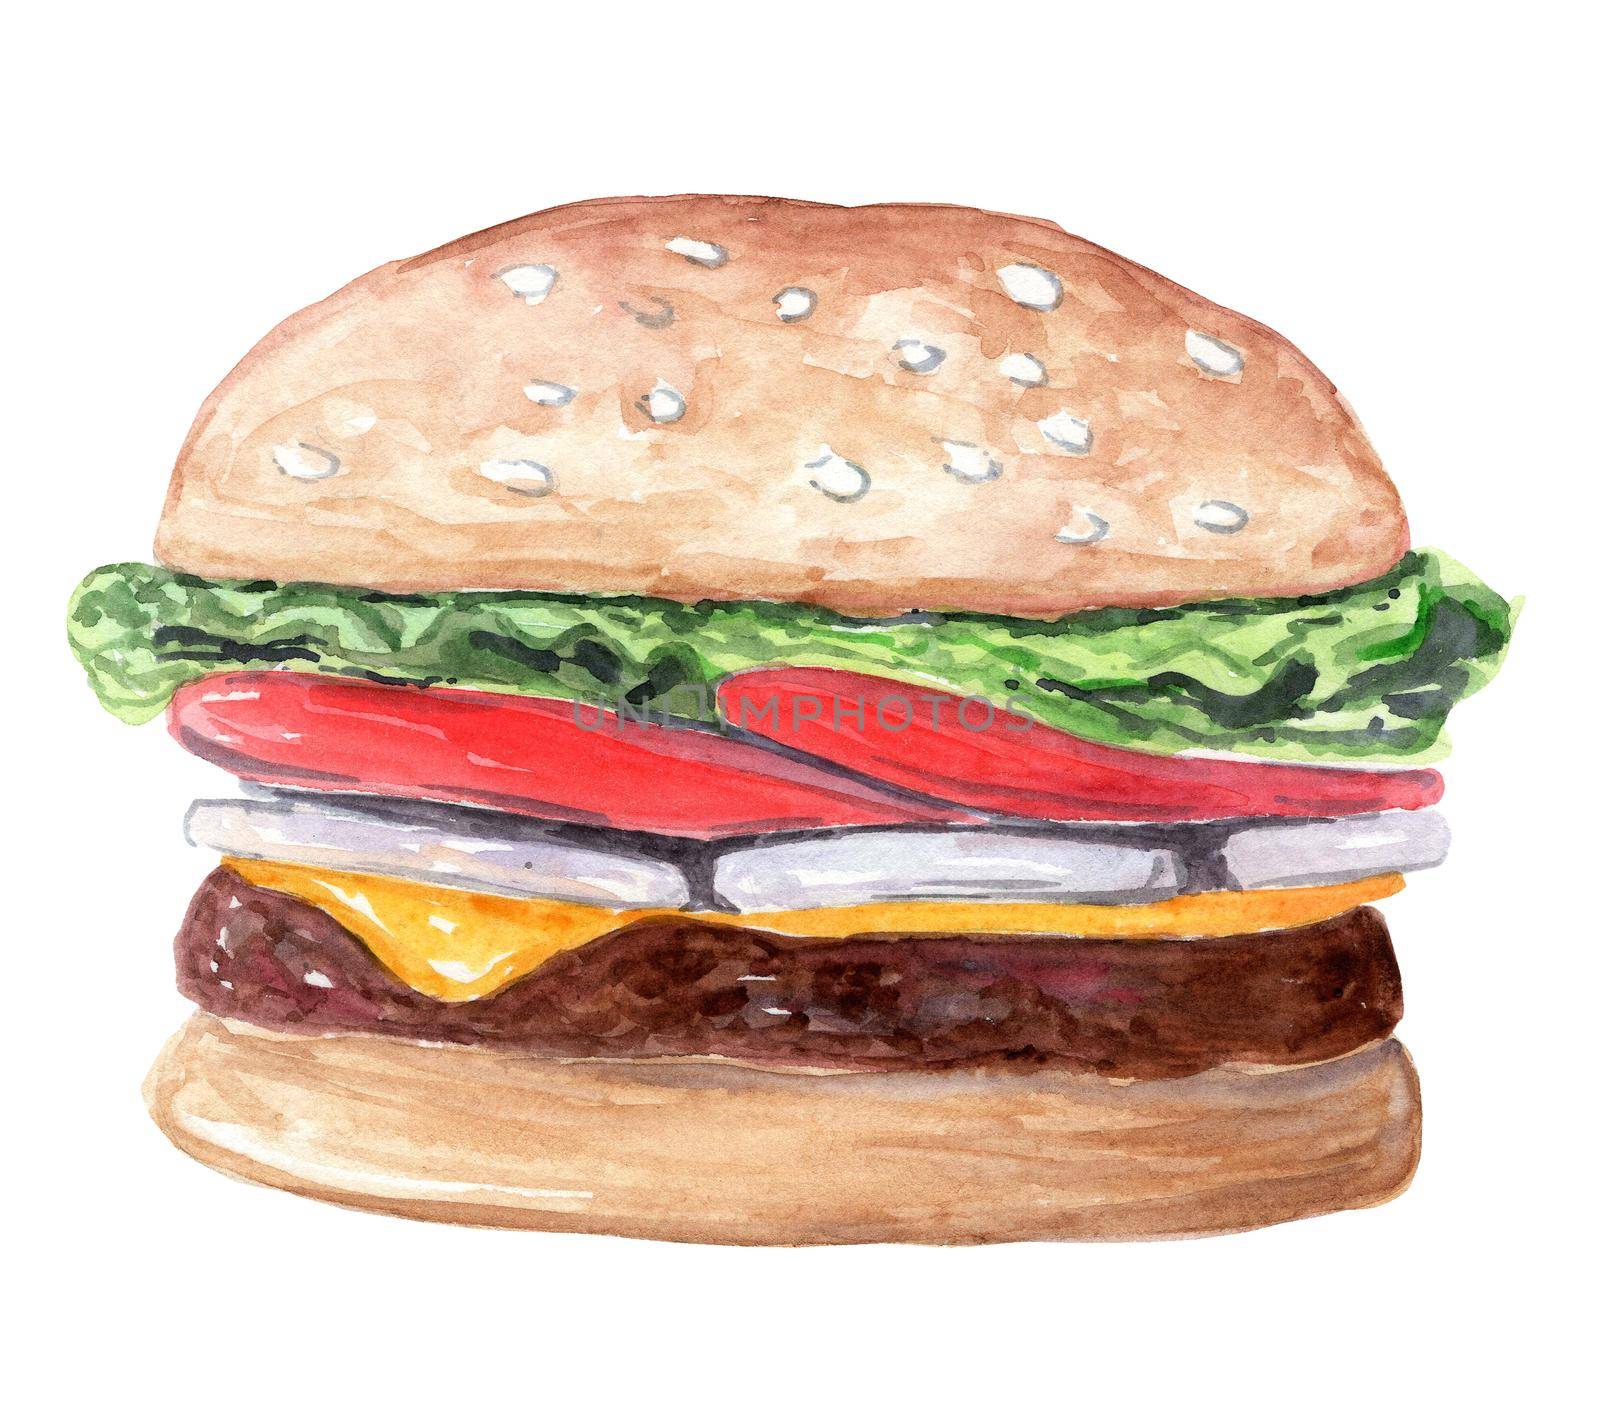 watercolor hand drawn brown burger with salad,tomato,cheese isolated on white background. Fast food illustration for cafe menu